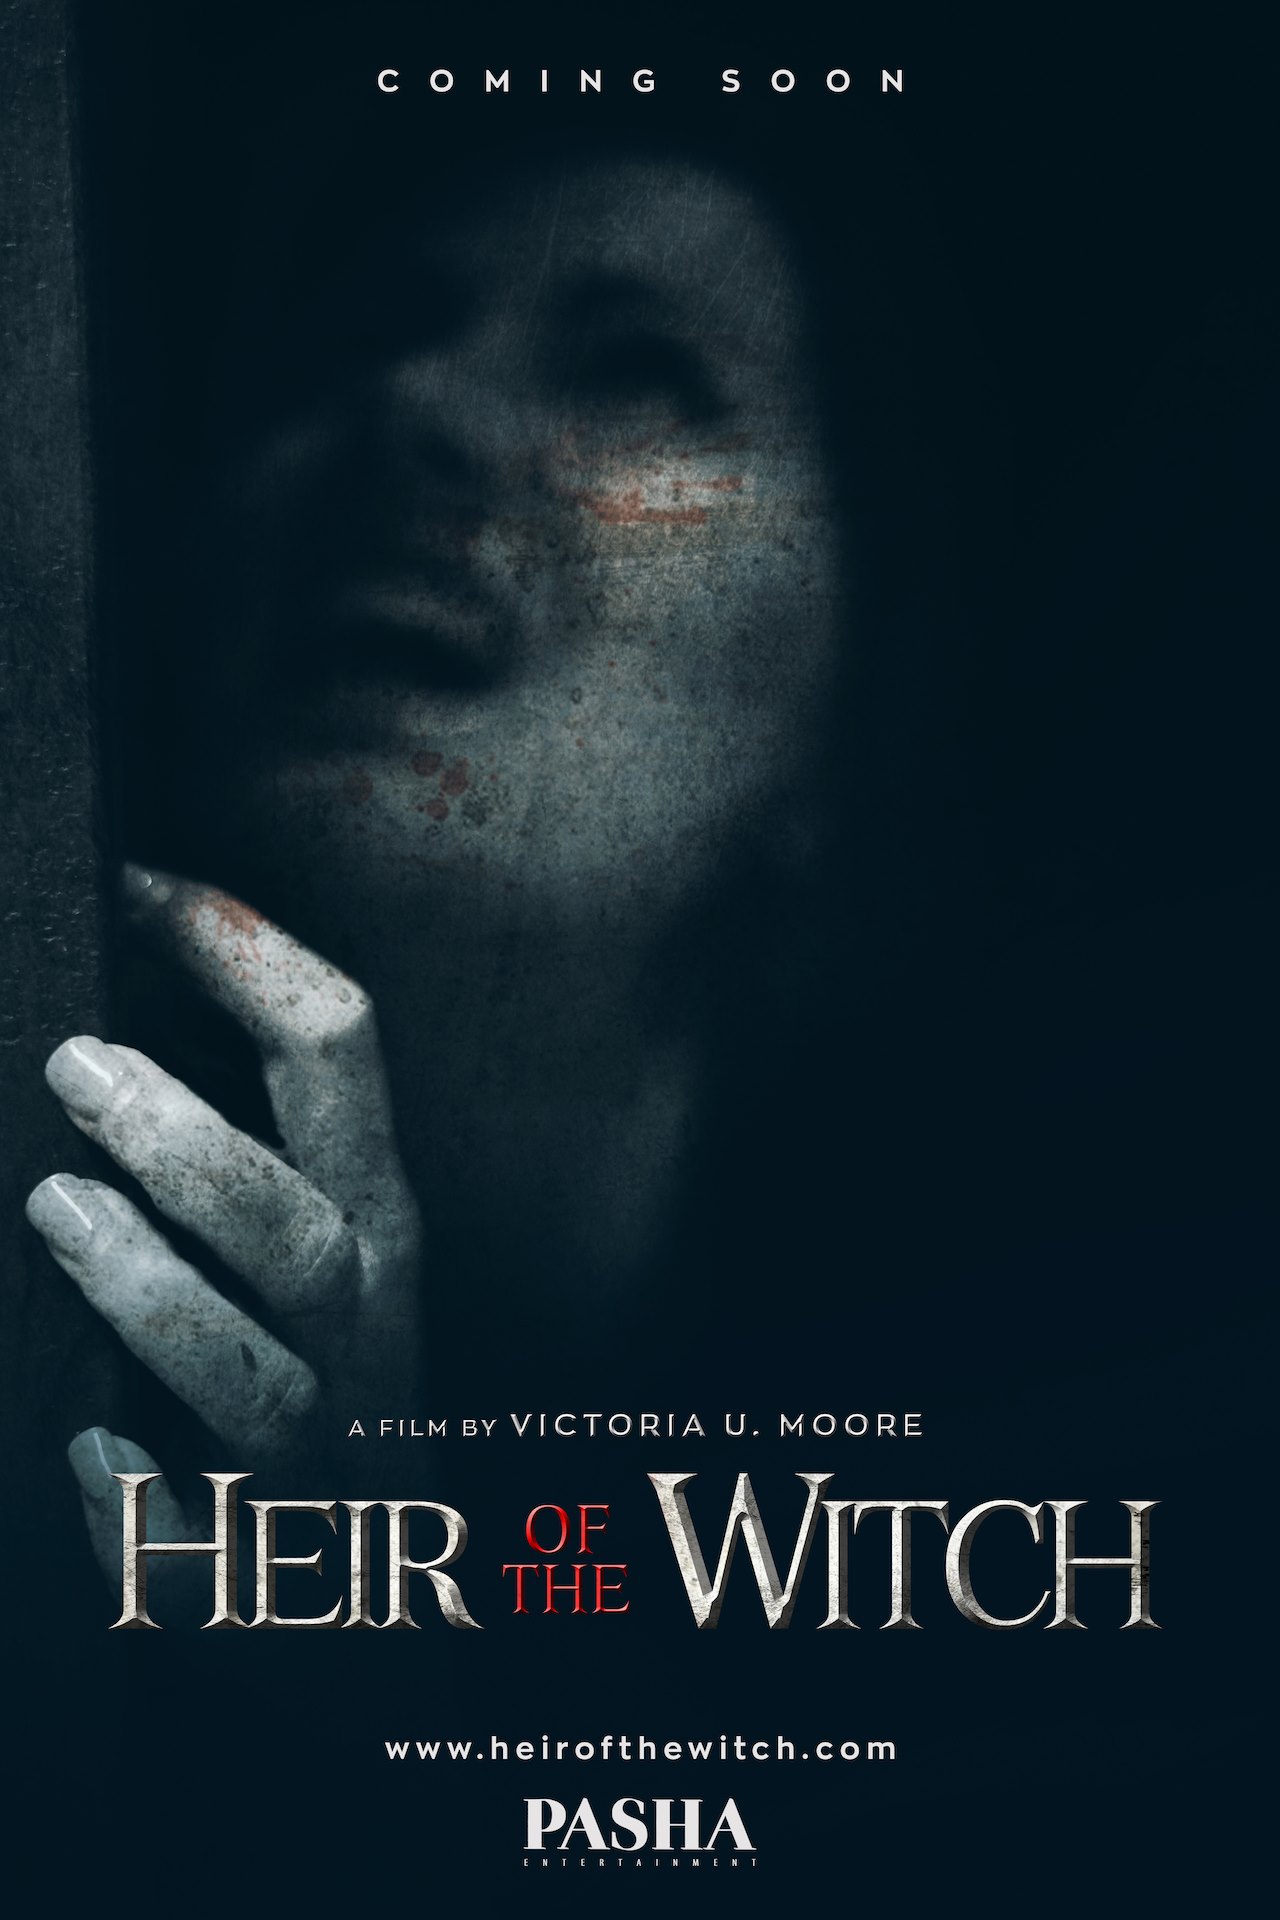 affiche du film Heir of the Witch